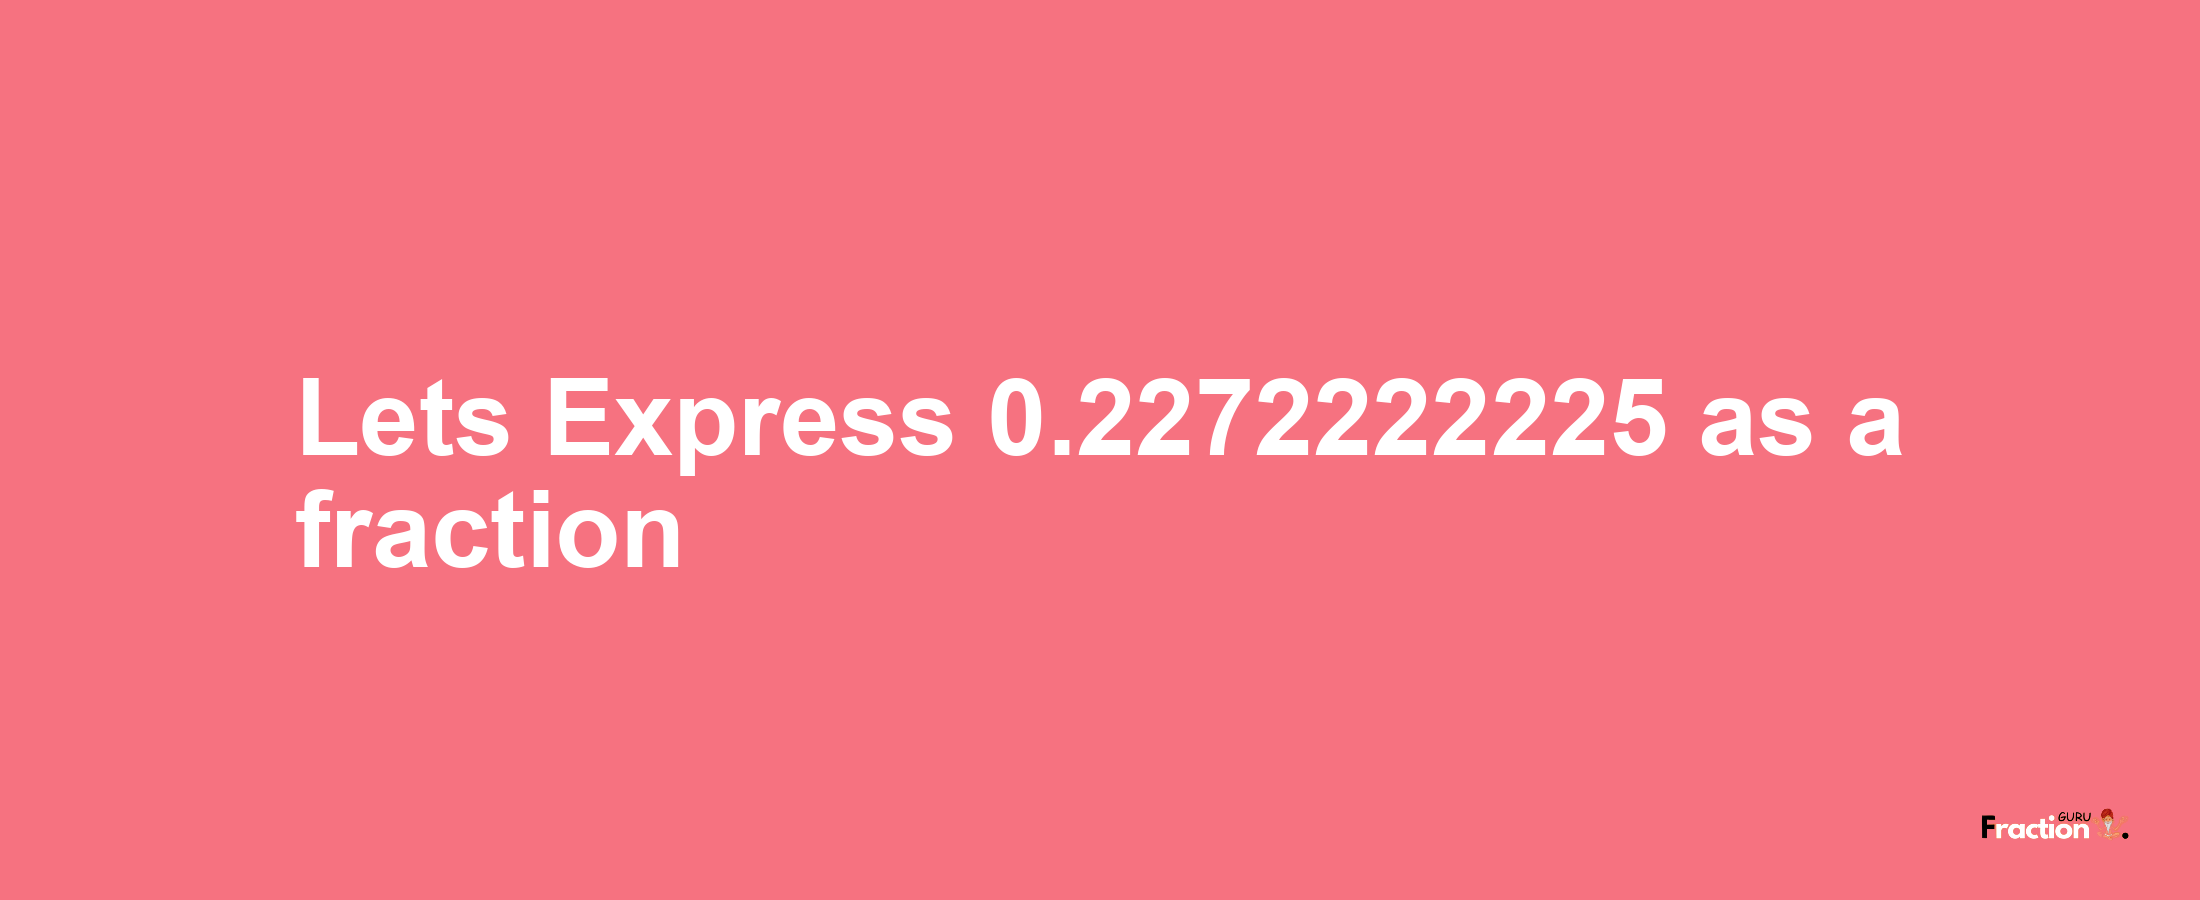 Lets Express 0.2272222225 as afraction